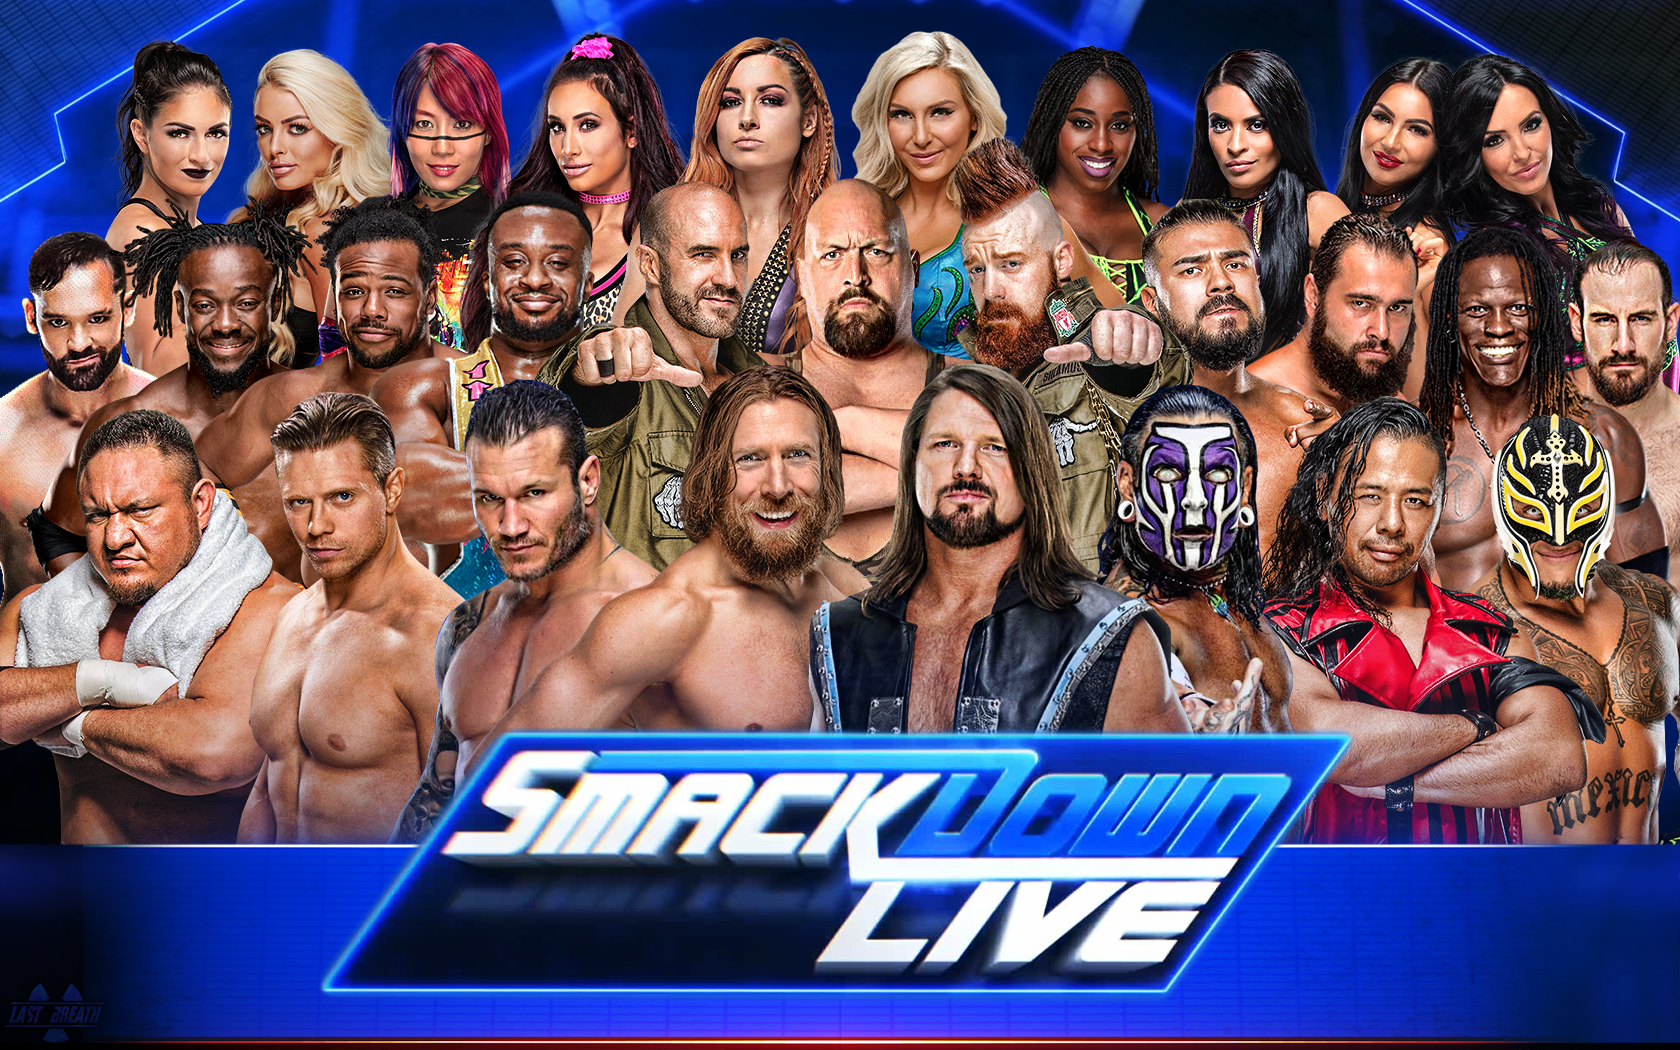 WWE SmackDown Live Wallpaper 2018 by